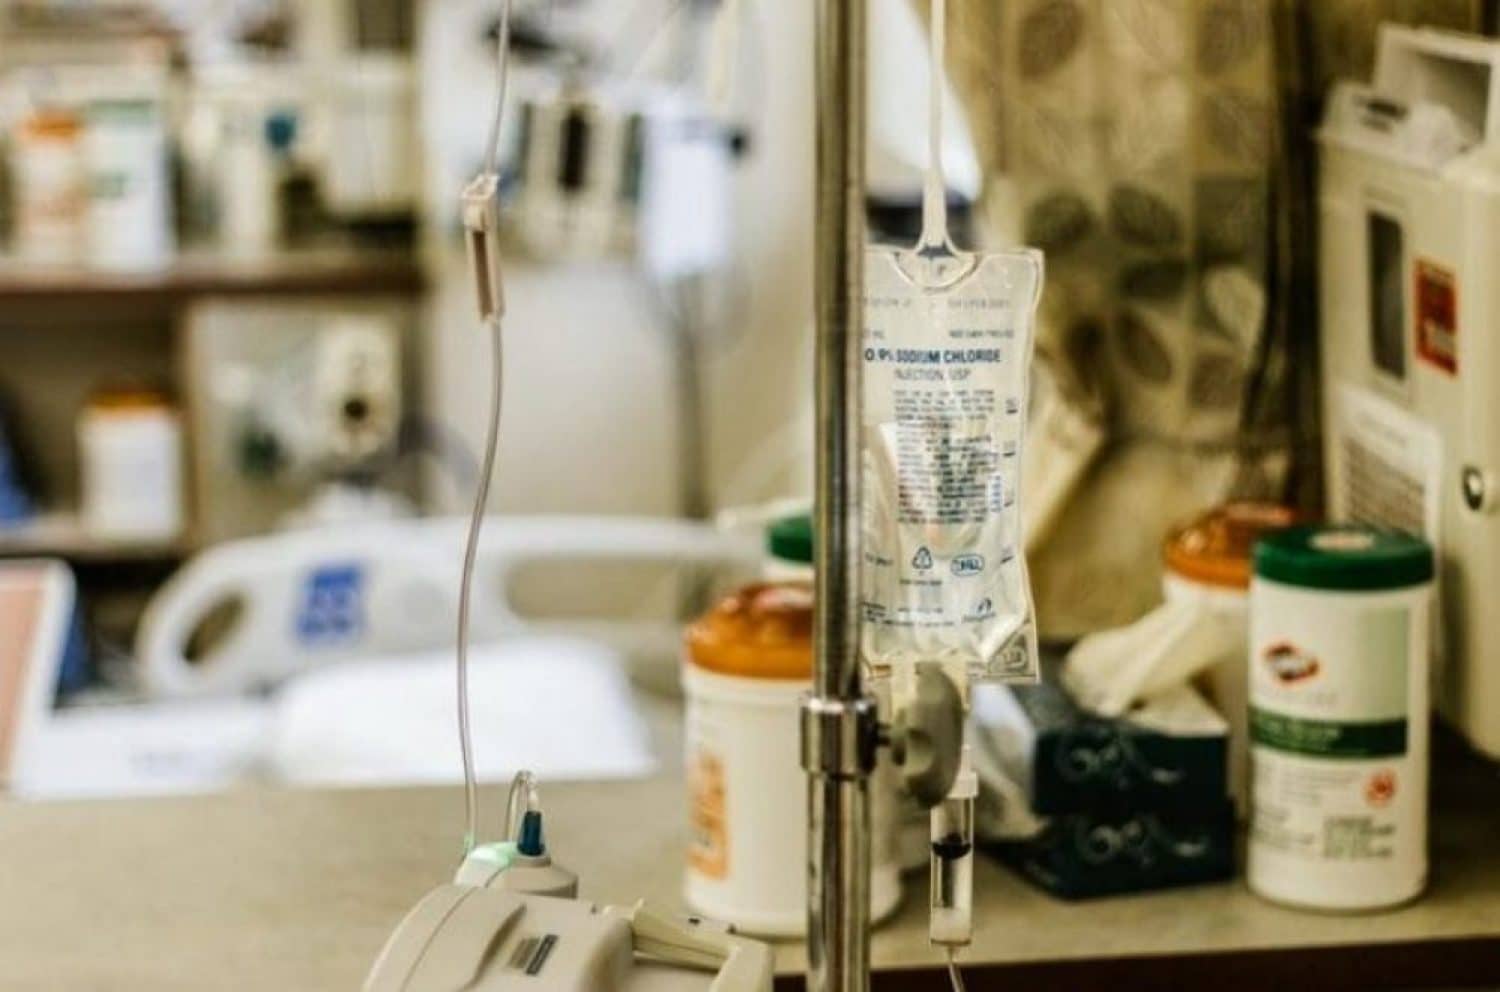 IV bag attached to an intravenous pole